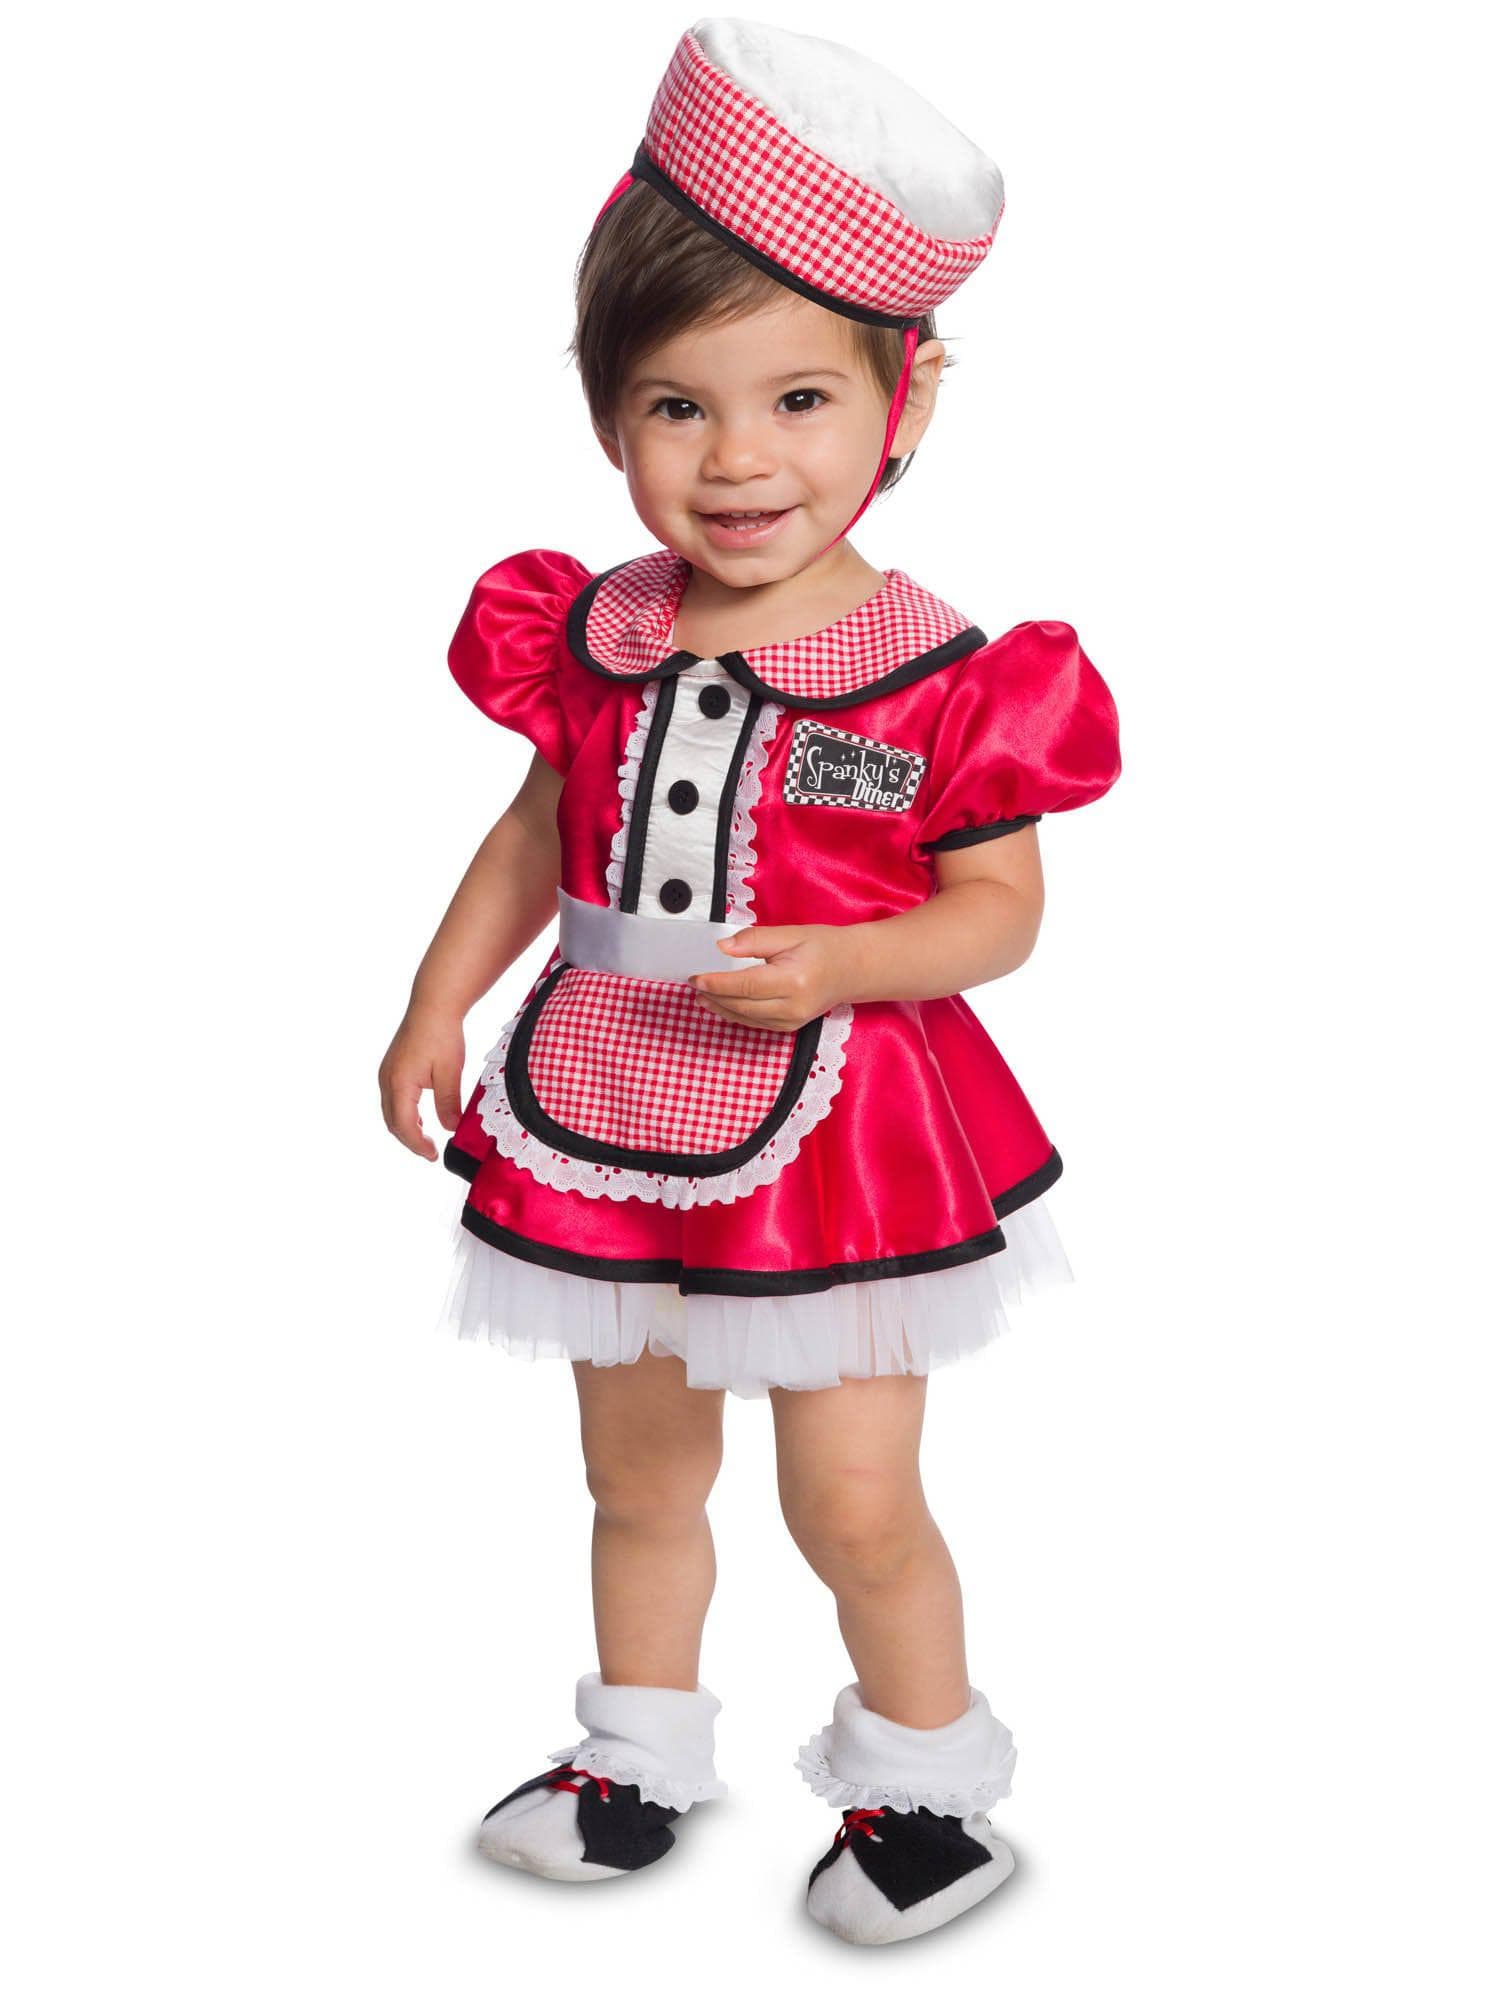 Baby/Toddler Diner Costume - costumes.com